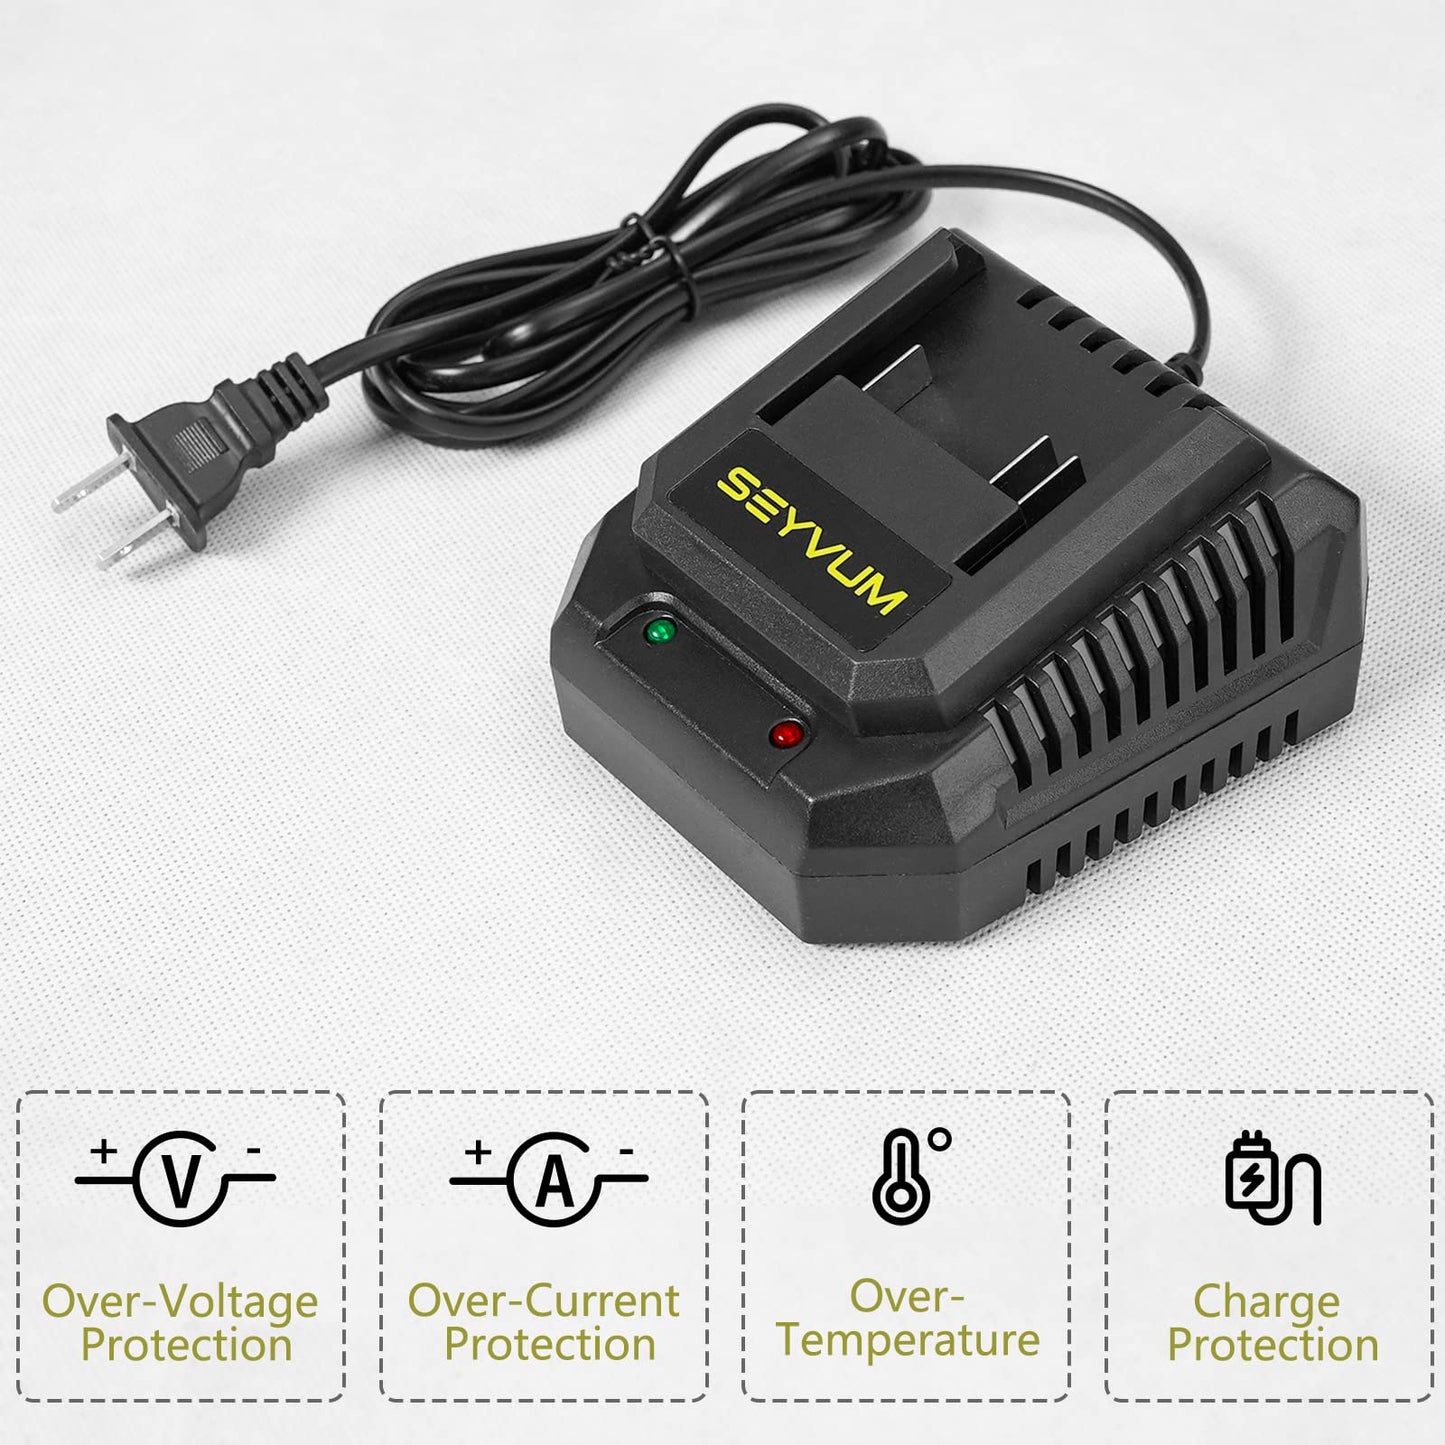 SEYVUM 2.0A Fast Charger, Replacement Charger for LB-8189 and LB-8190 Leaf Blower